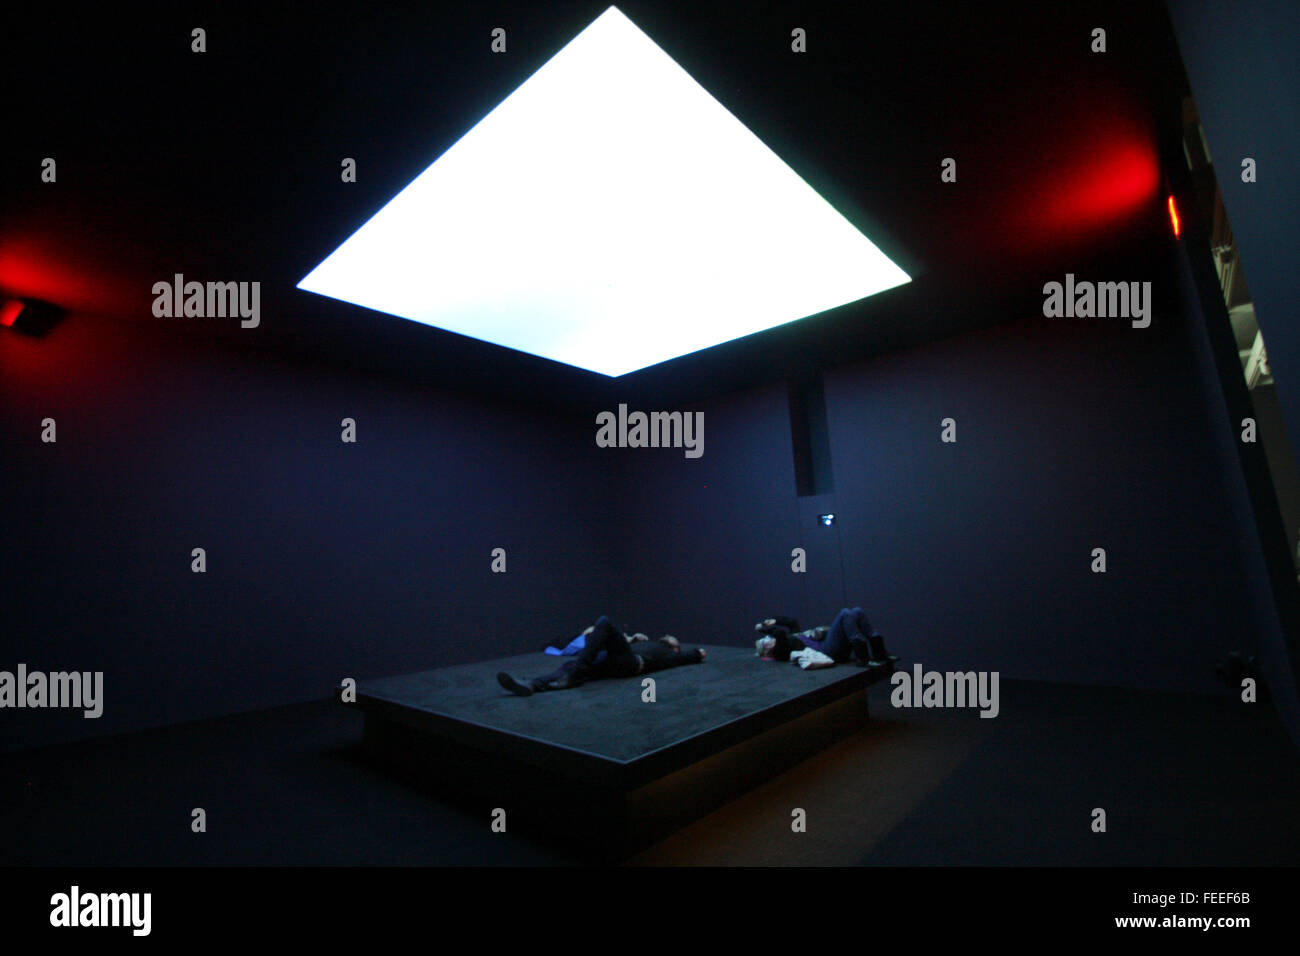 Visitors lying on a bed like platform, while watching images of the skies above Yeman, Somalia and Pakistan overhead, as part of the installation of Astro Noise, the first solo exhibit by artist Laura Poitras at the Whitney Museum of American Art in New York City on February 3, 2016.  Later in the exhibit thermal images captured while people lay in this room, are displayed.  Poitras, a filmmaker, artist and journalist best known for helping to break the Edward Snowden story, created the exhibition as an immersive multimedia experience examining topics such as mass surveillance, the war on terr Stock Photo